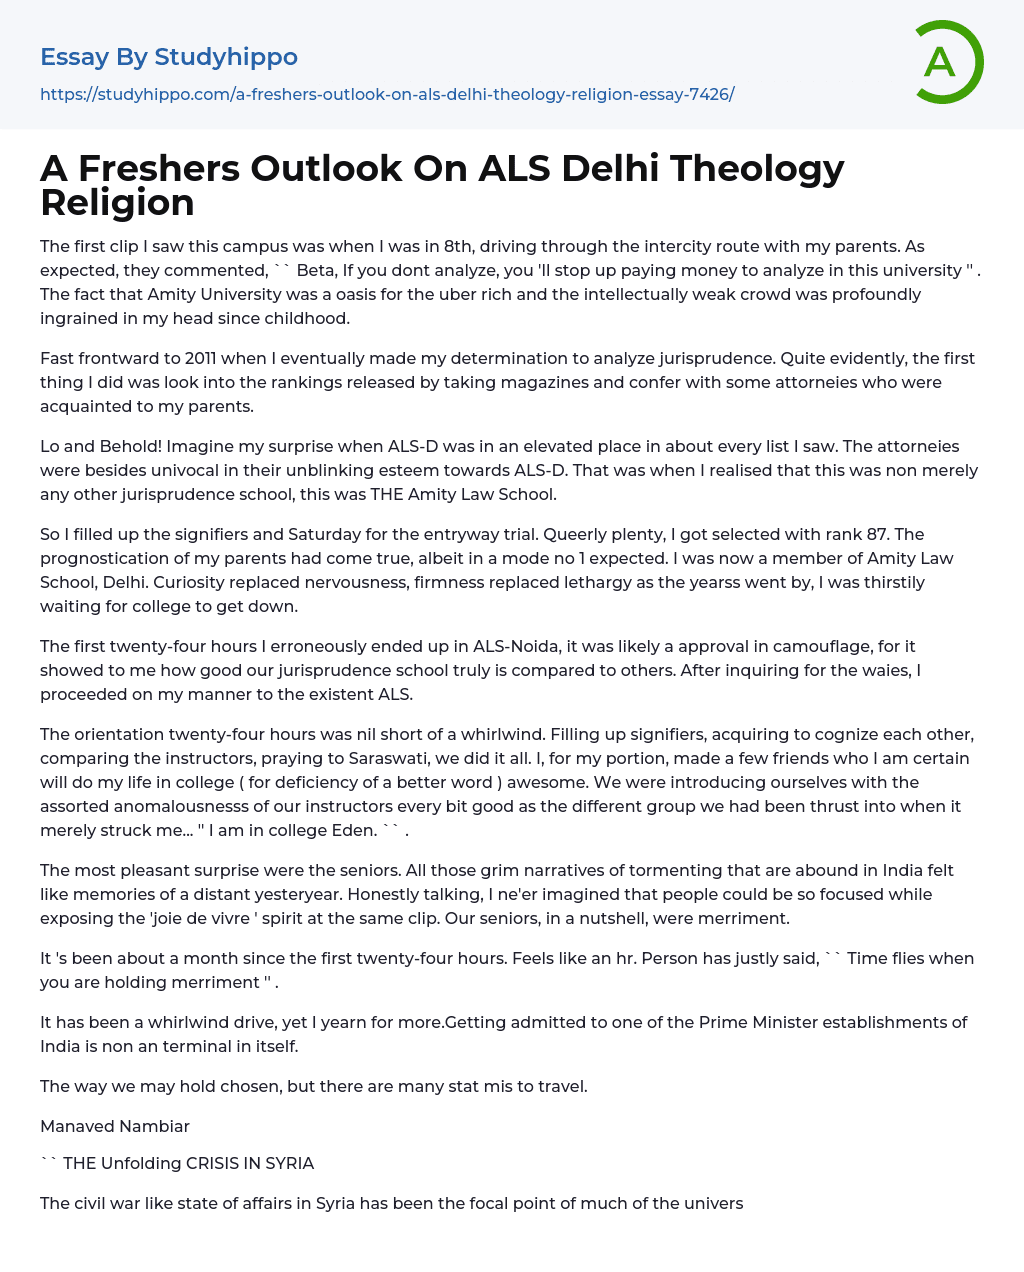 A Freshers Outlook On ALS Delhi Theology Religion Essay Example